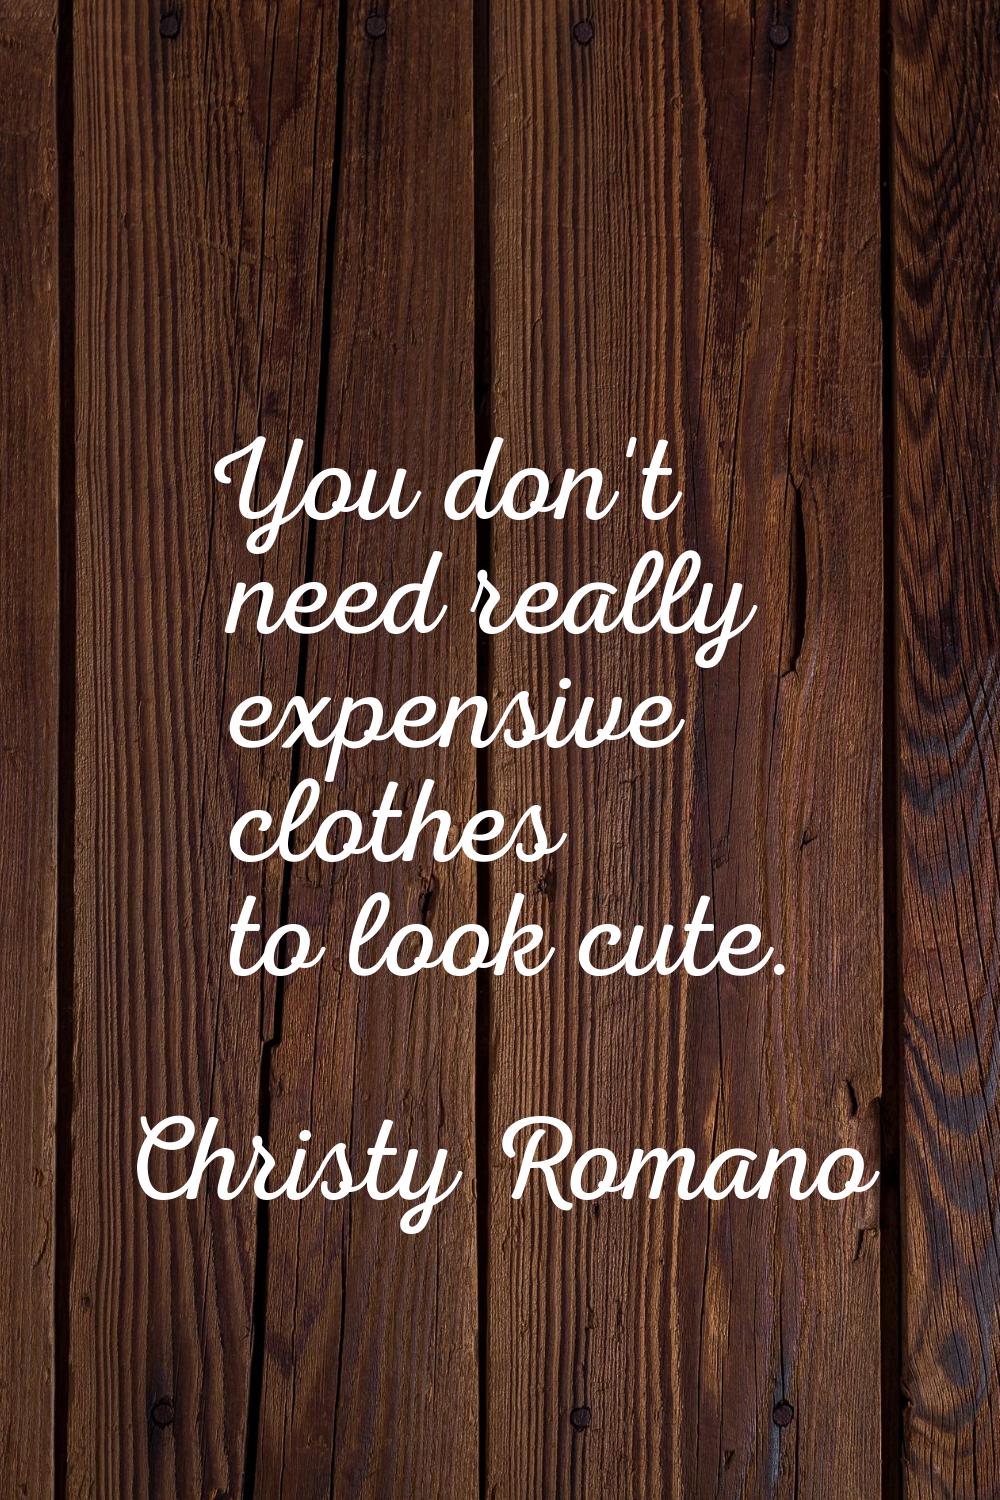 You don't need really expensive clothes to look cute.